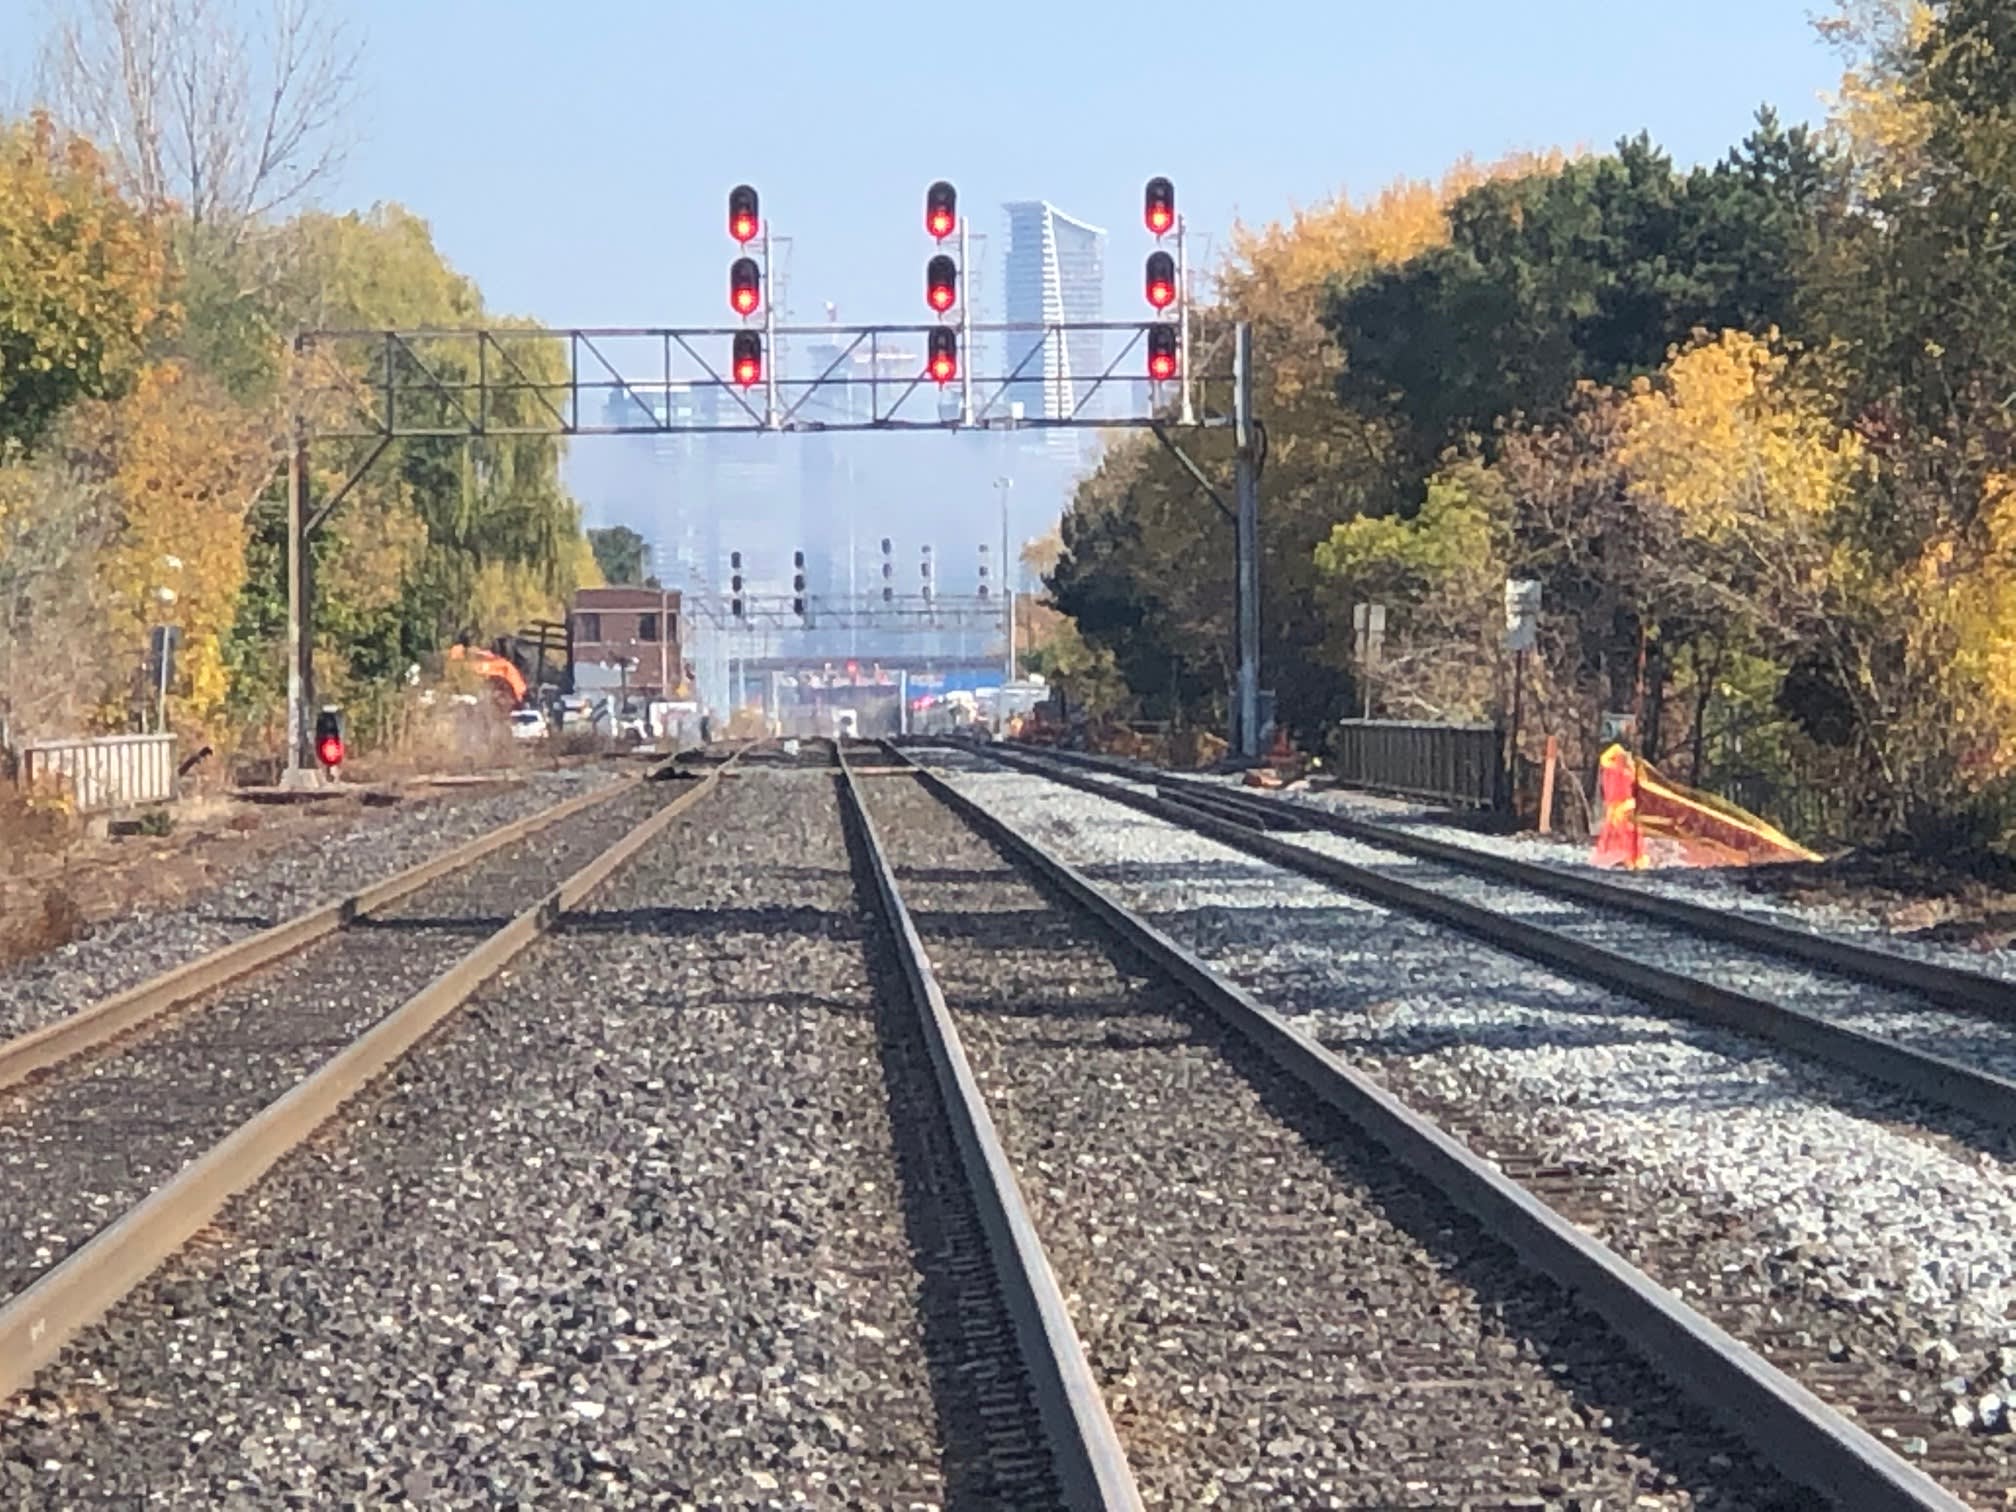 Looking down the tracks on the Lakeshore West line on a fall day